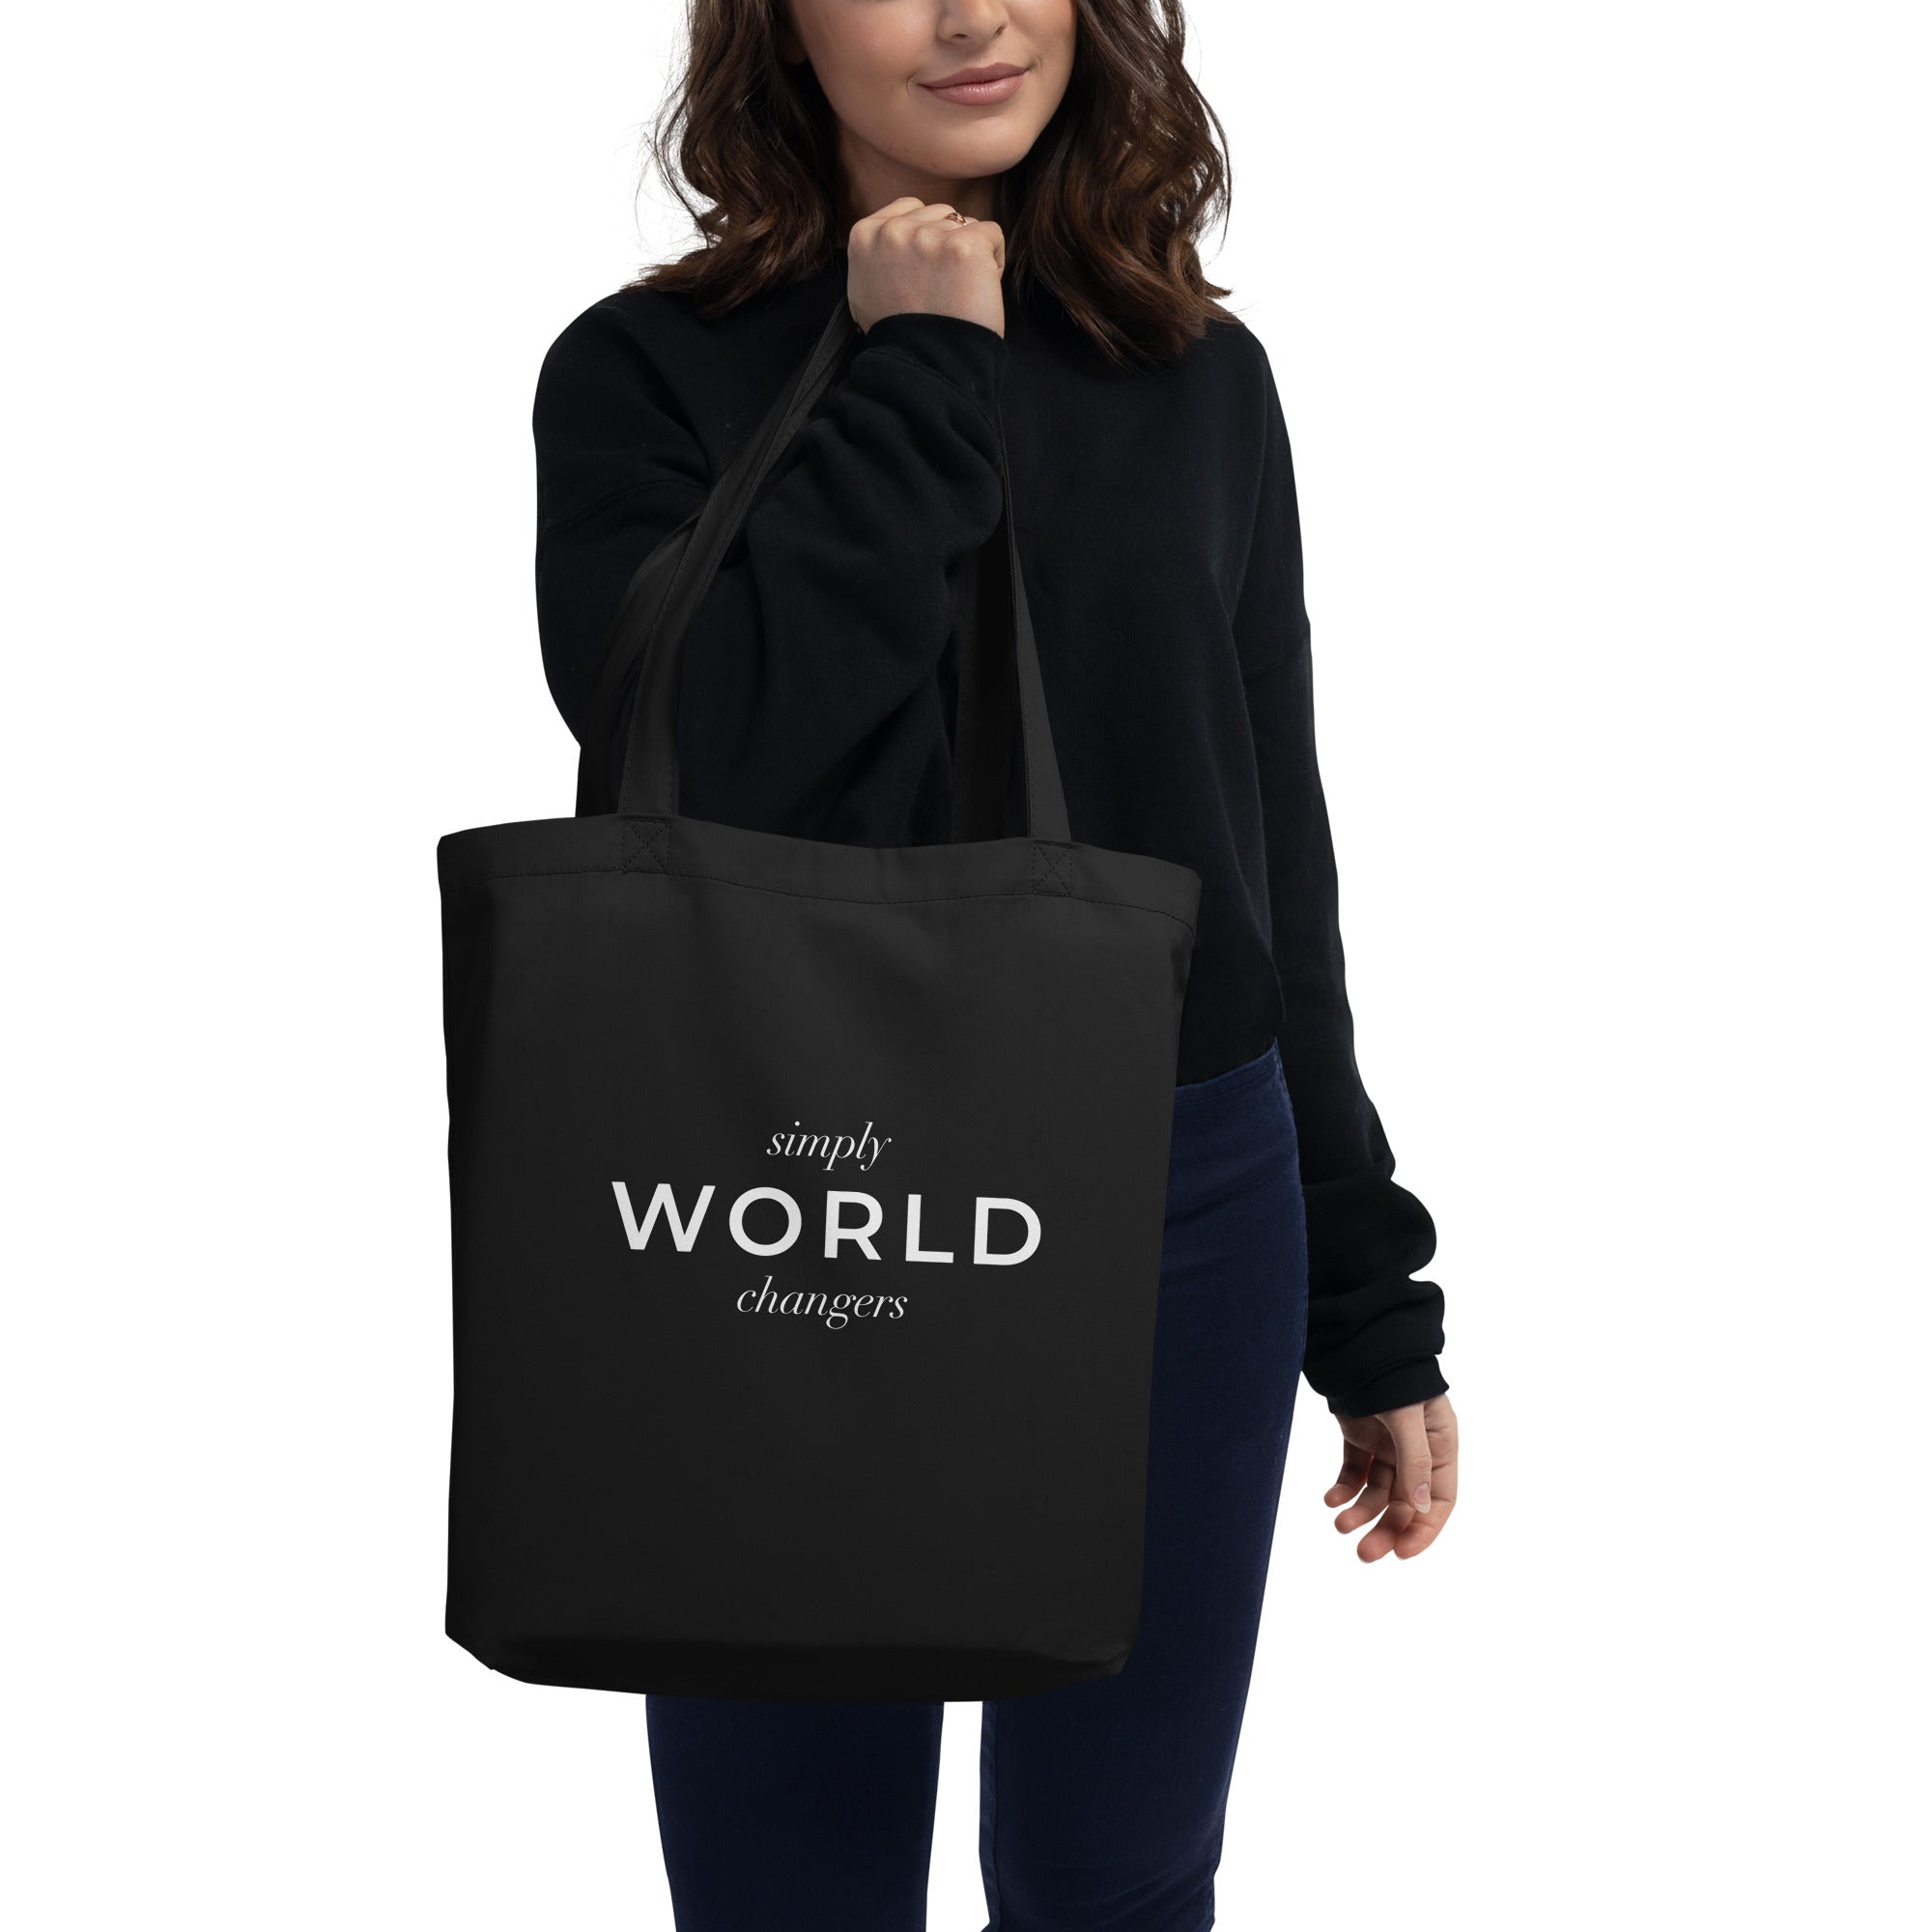 Simply World Changers Tote Bag